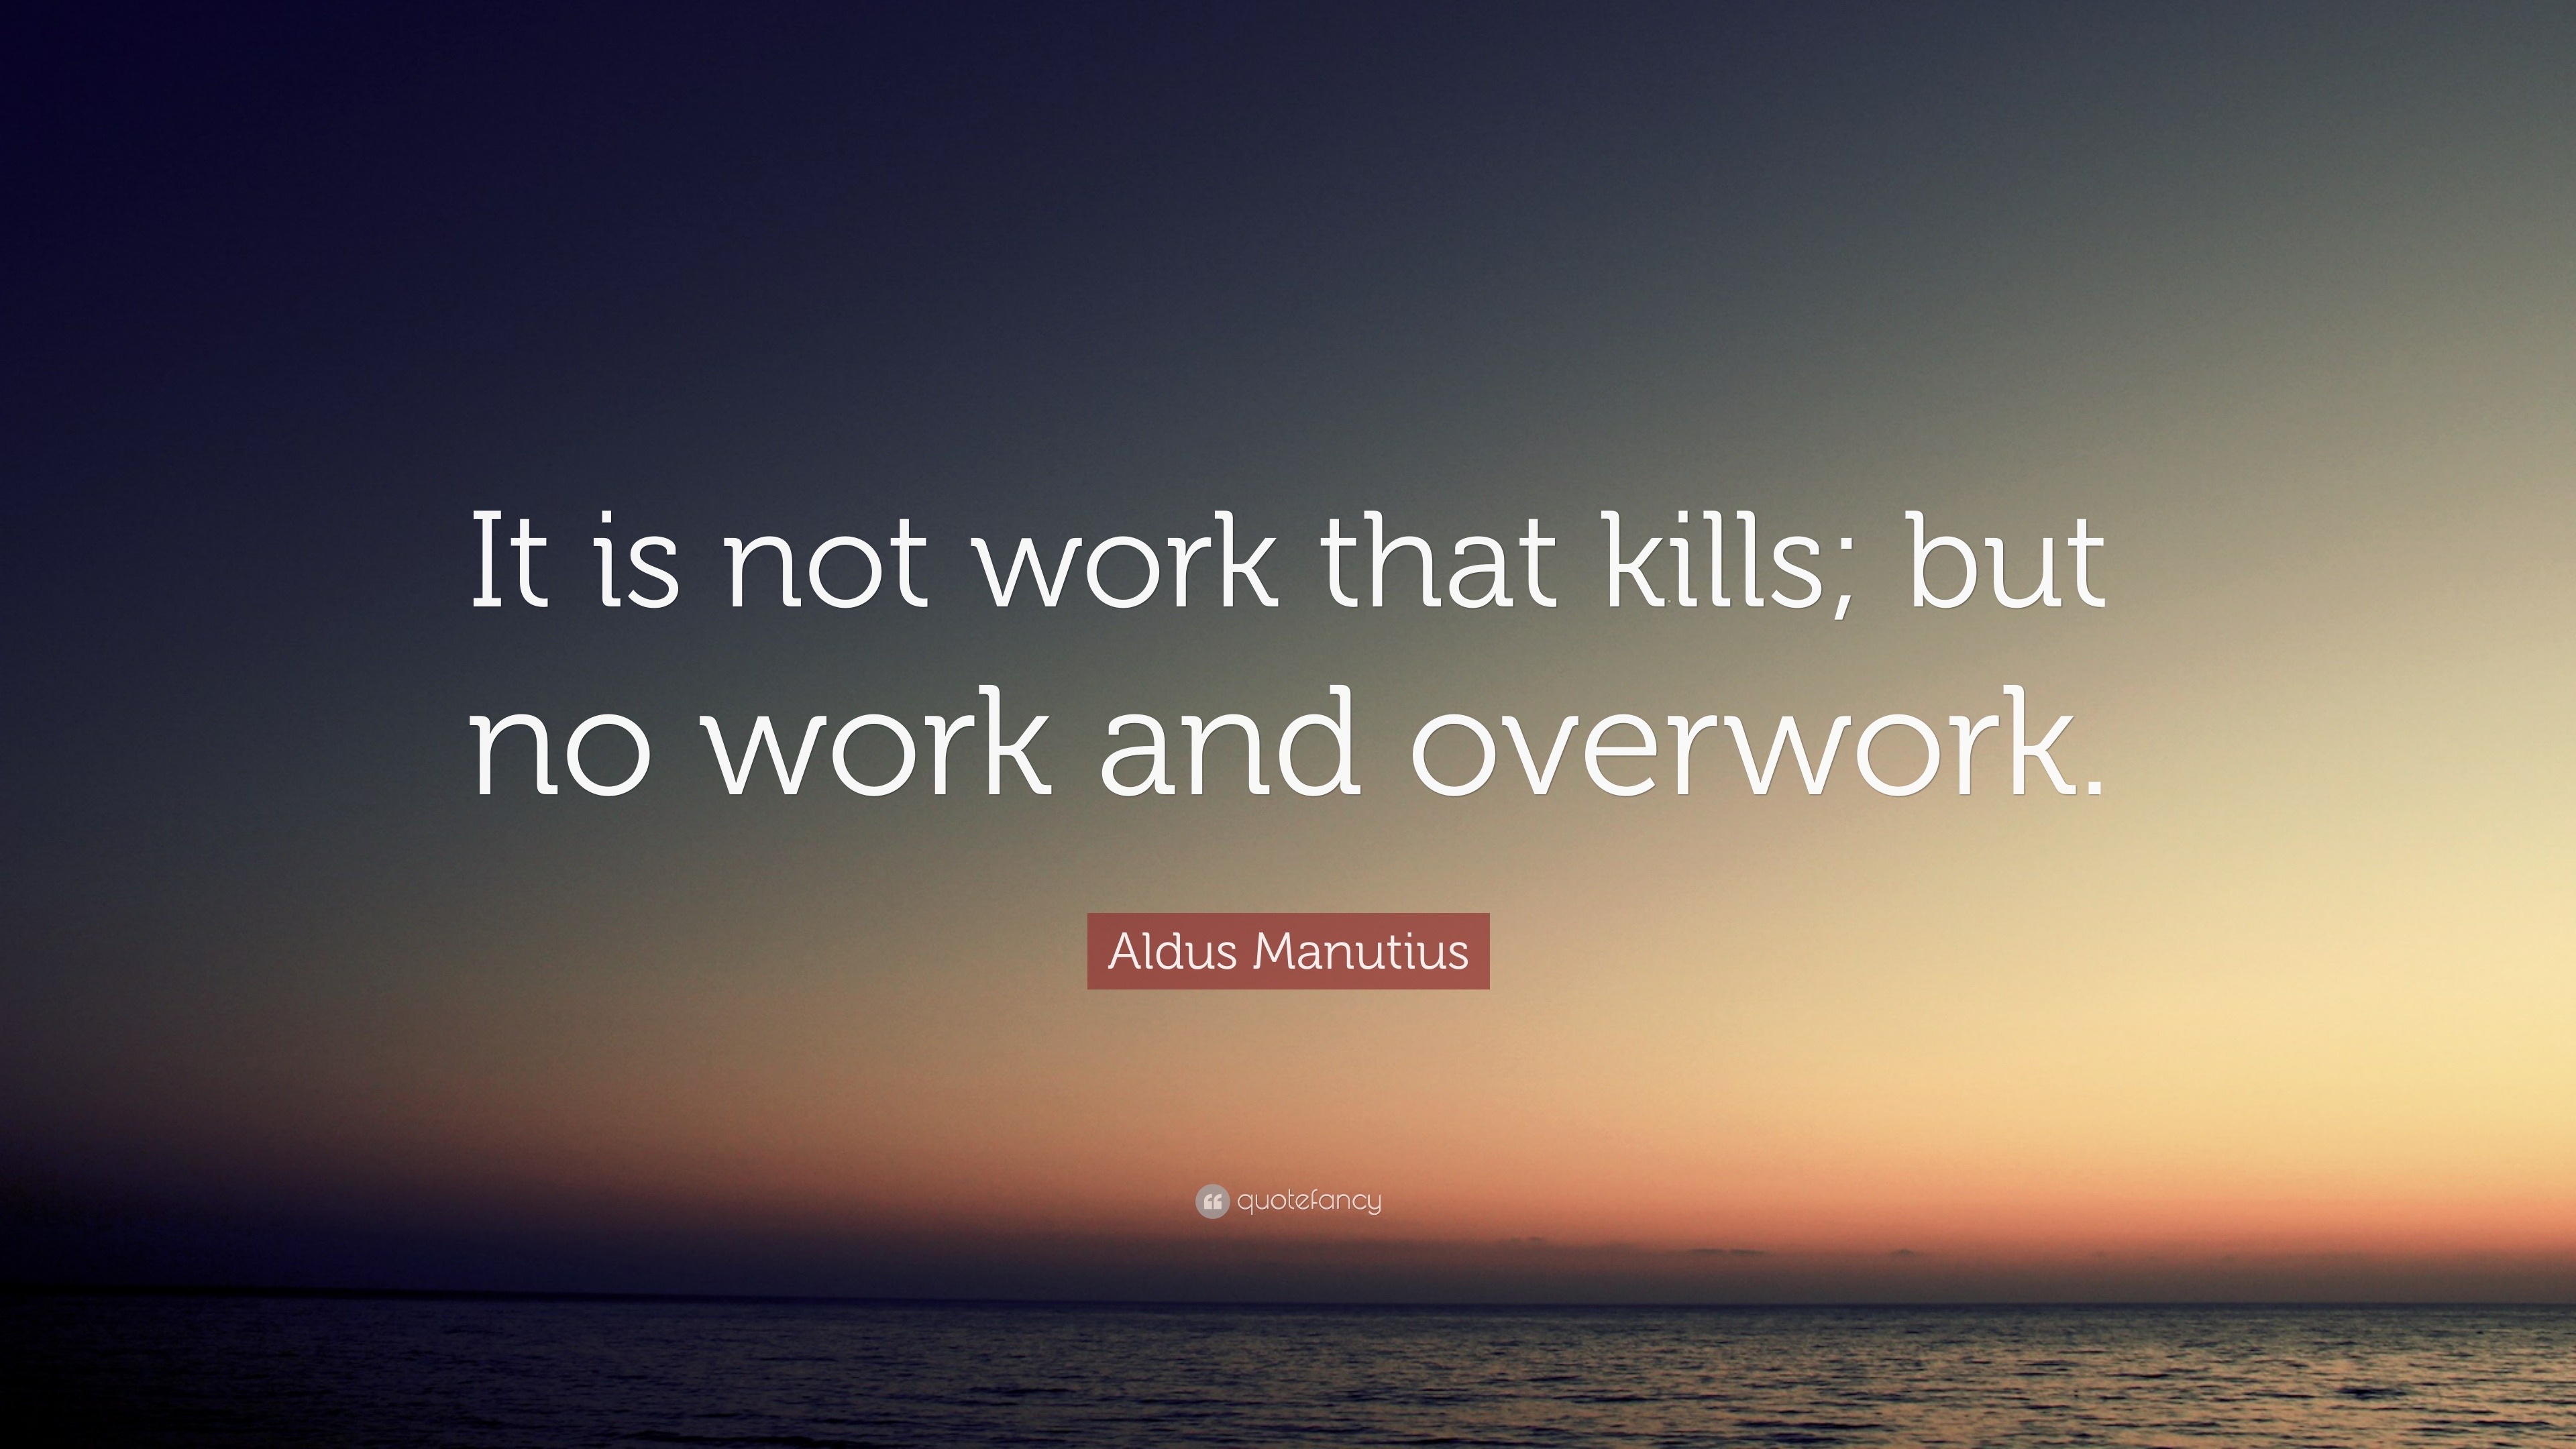 Aldus Manutius Quote: “It is not work that kills; but no work and ...